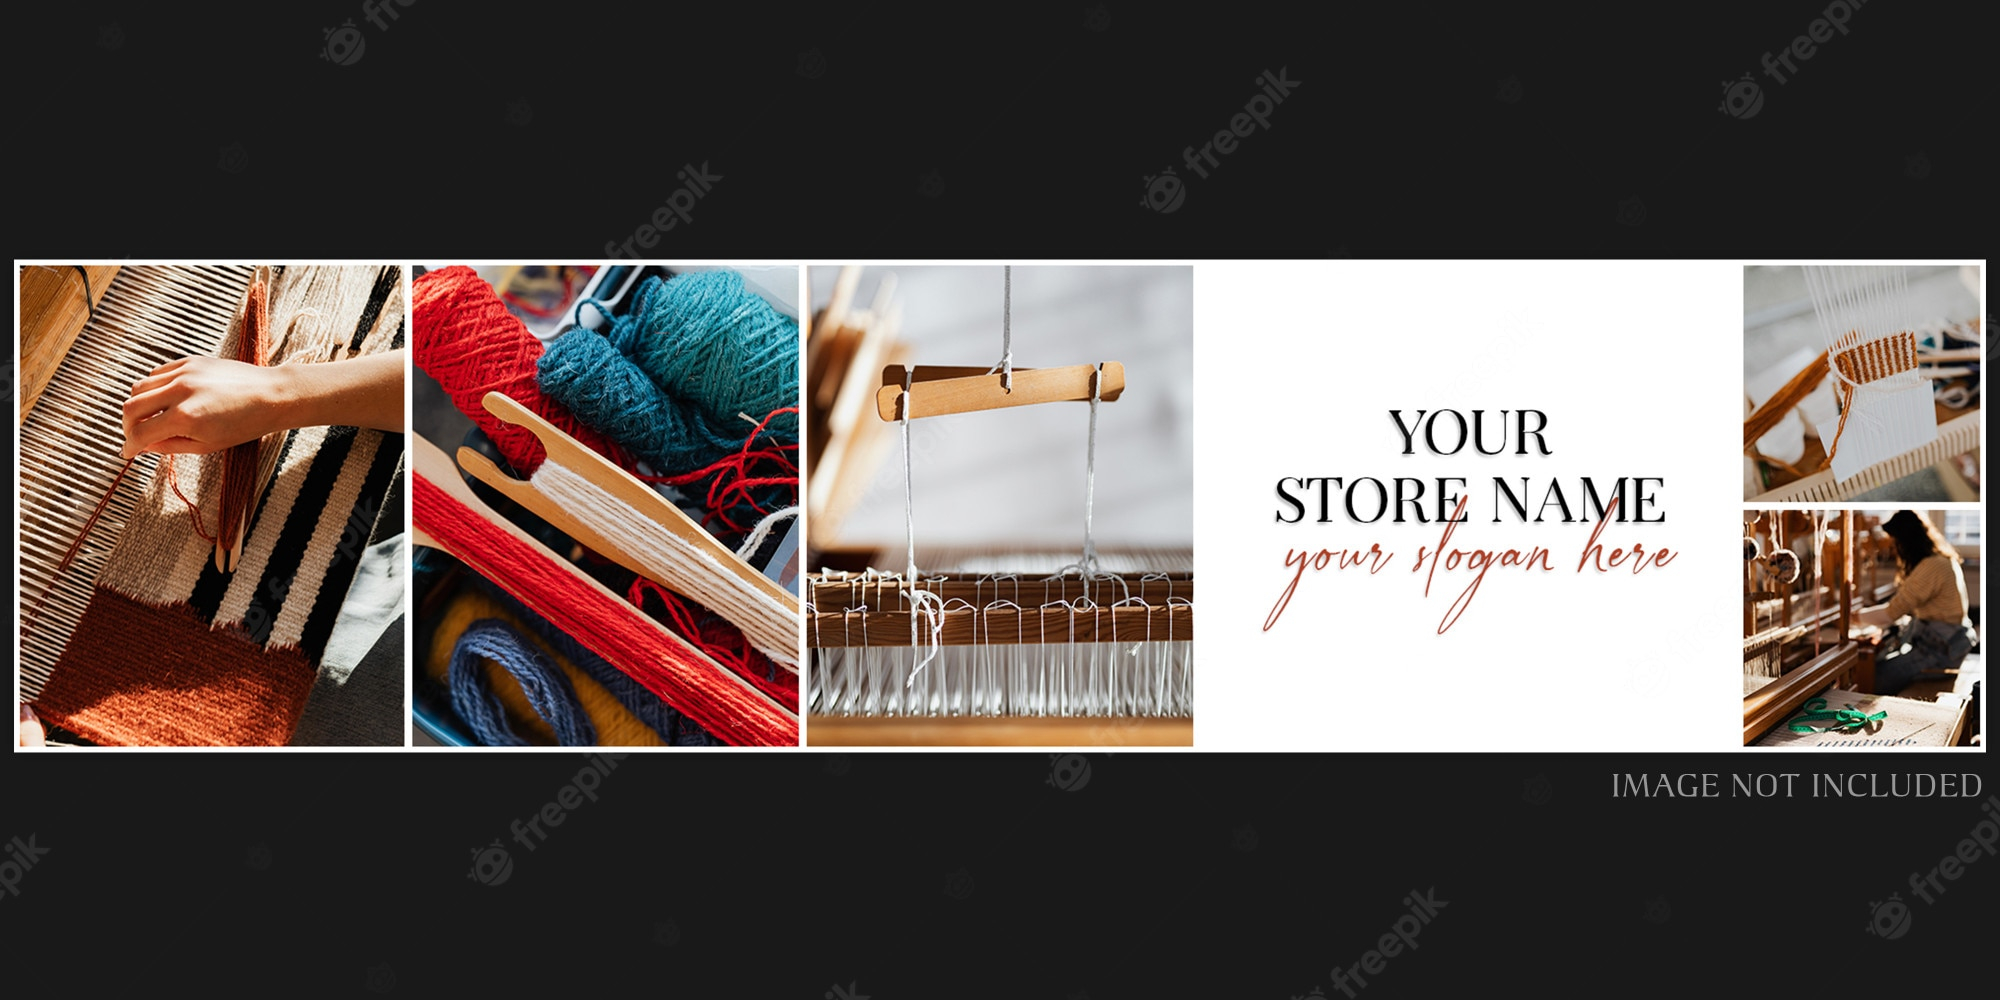 Etsy banner Images  Free Vectors, Stock Photos & PSD With Regard To Free Etsy Banner Template